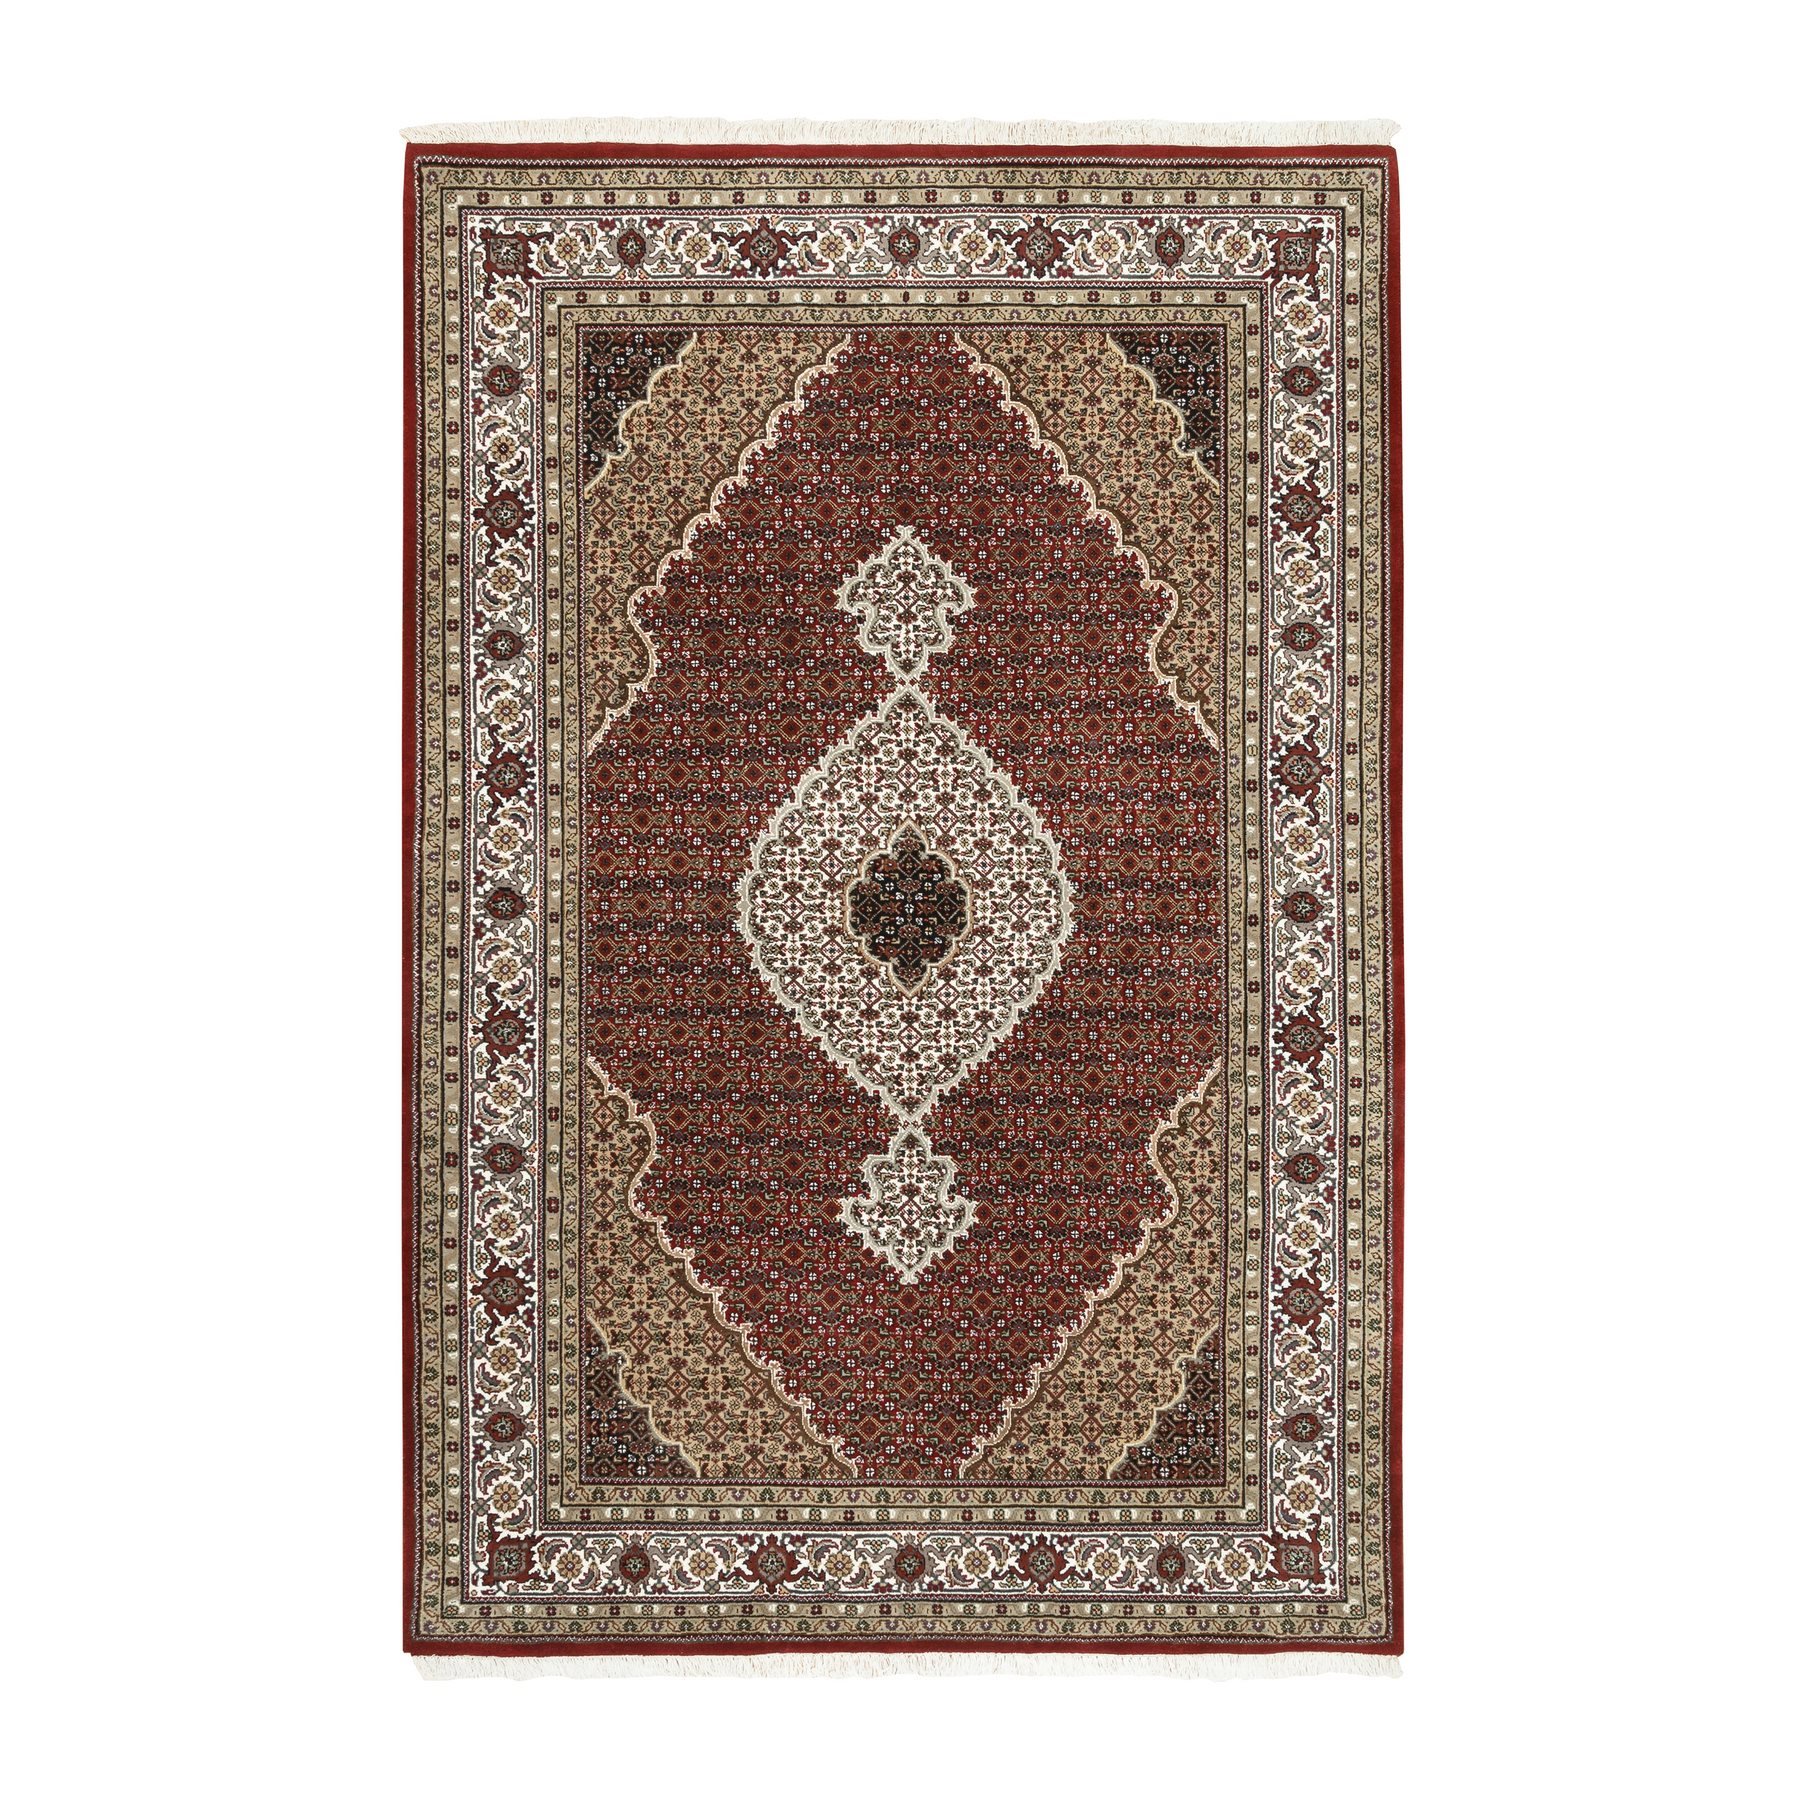 Pirniakan Collection Hand Knotted Red Rug No: 1125194